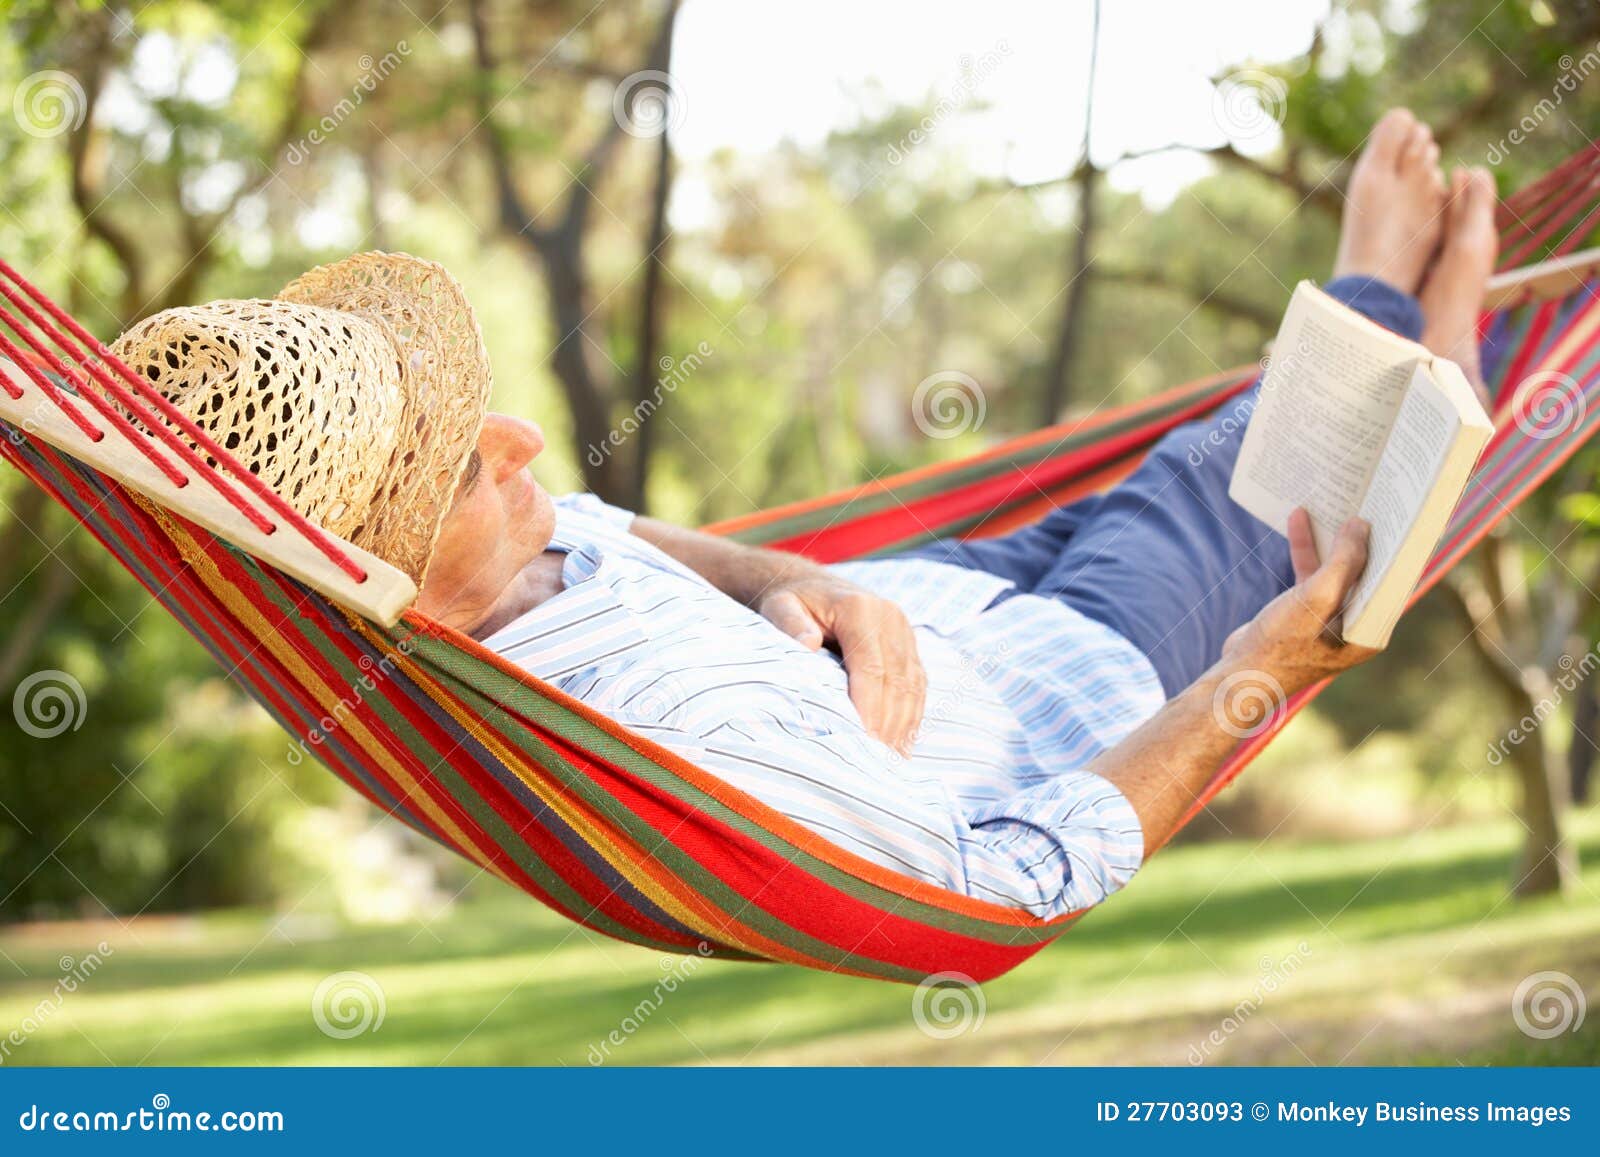 senior man relaxing in hammock with book